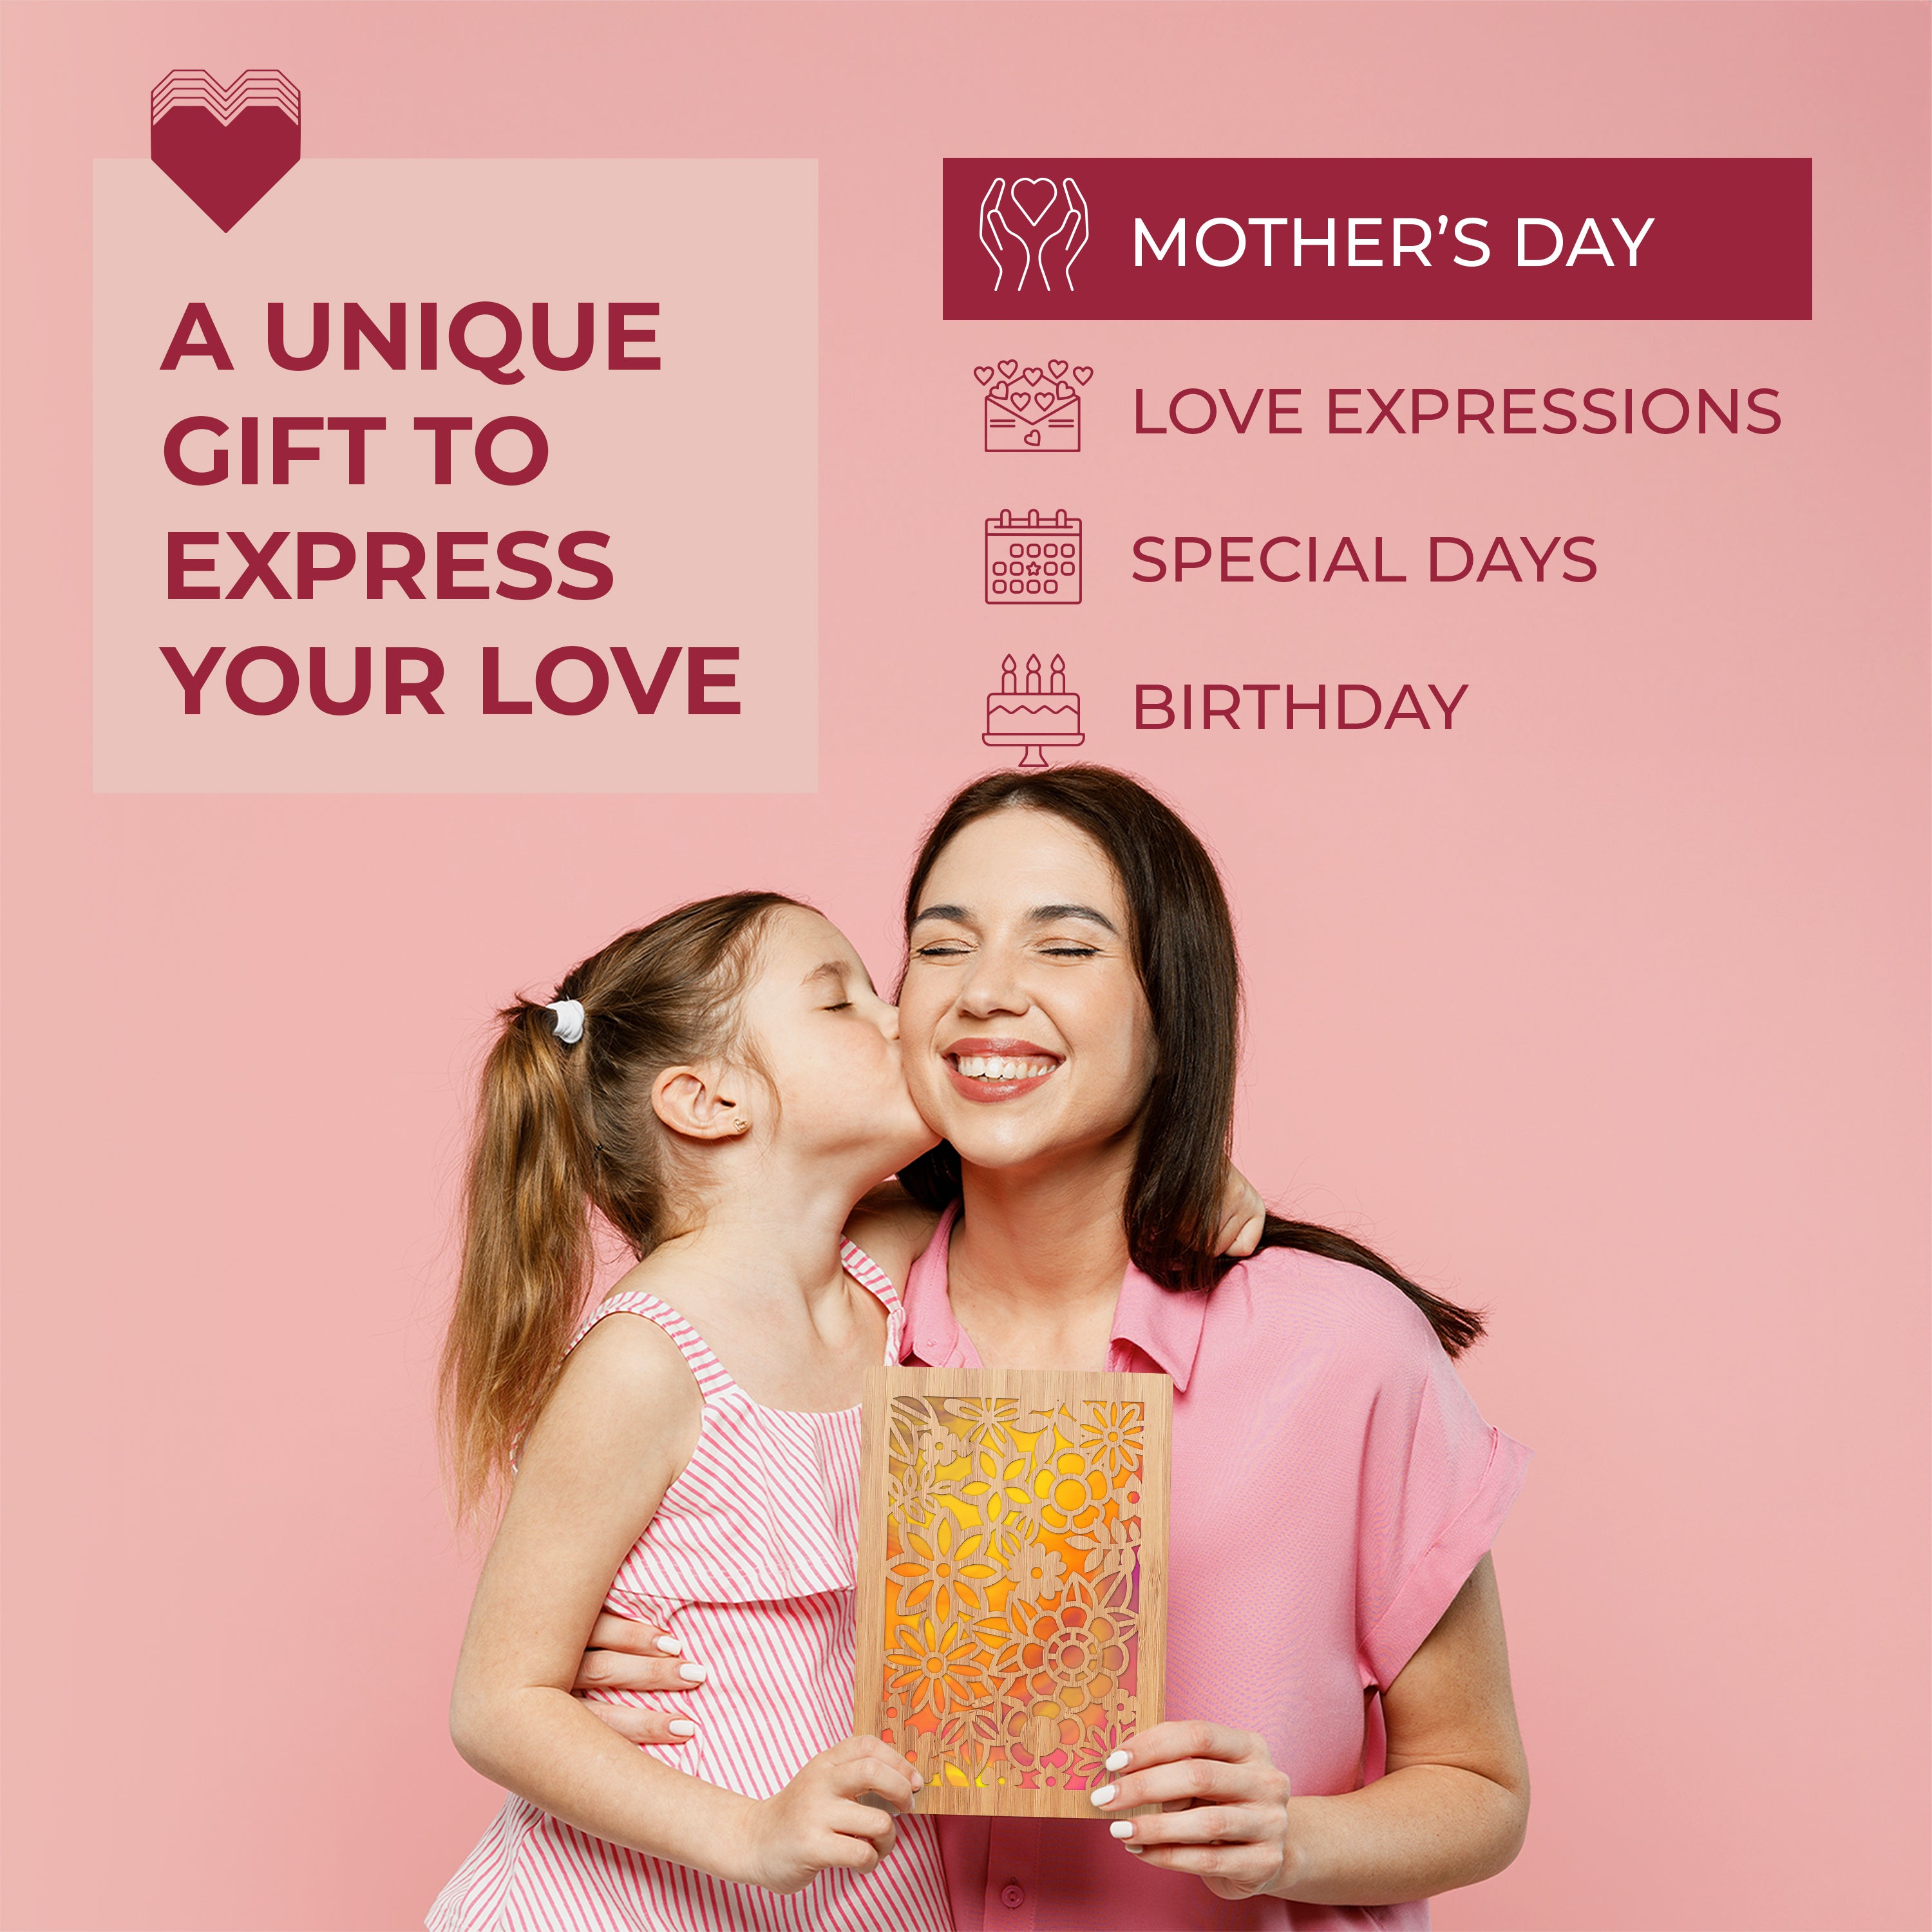 Handcrafted Bamboo Mother's Day Cards - Wildflower